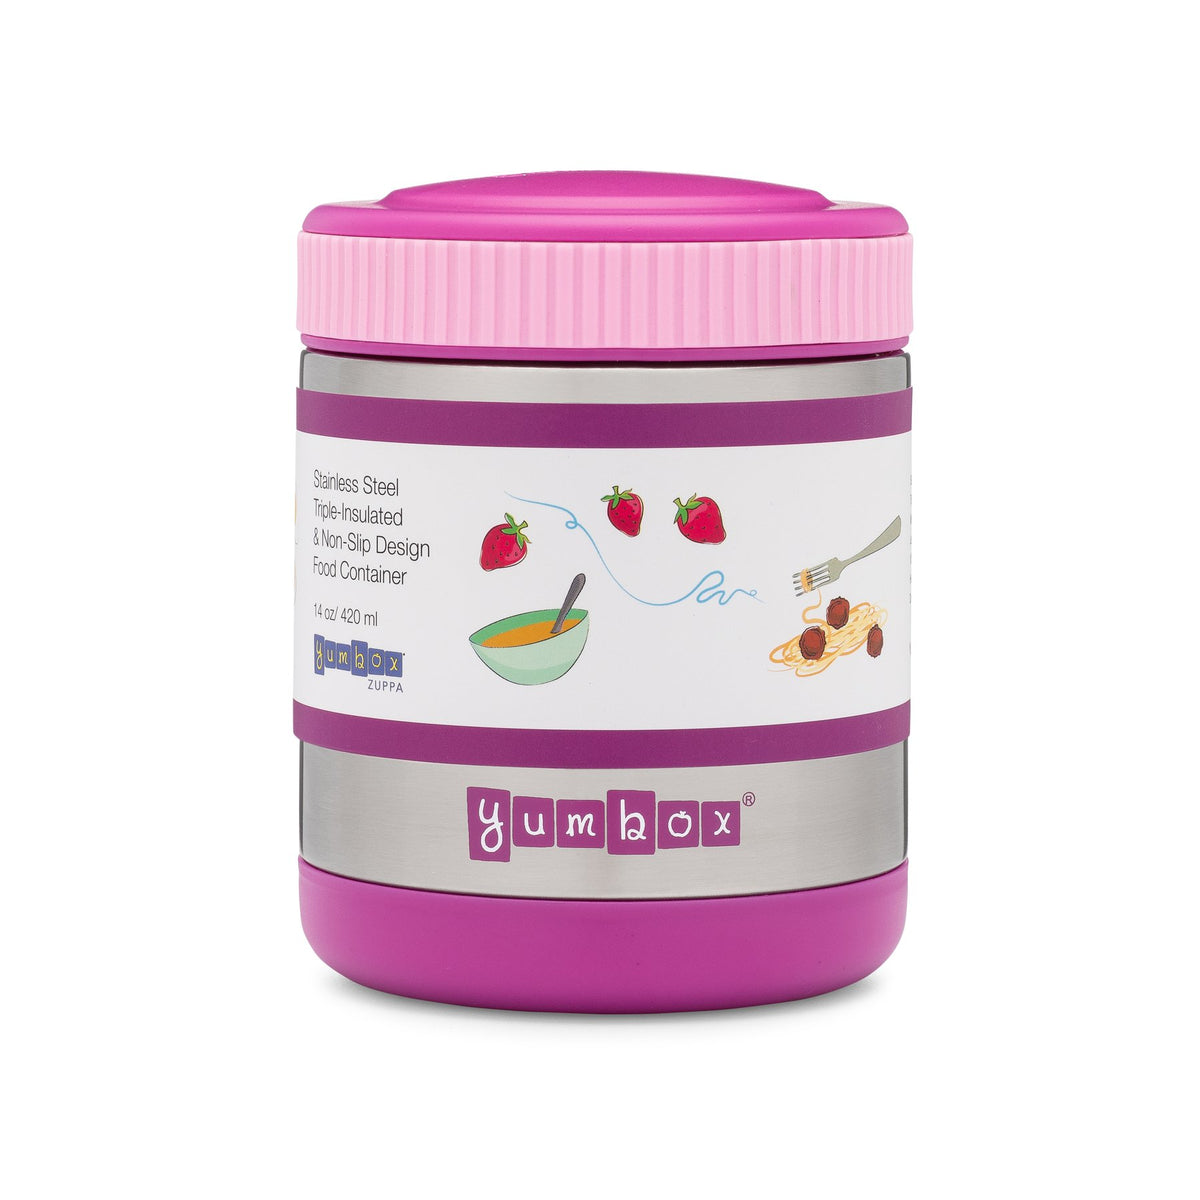 yumbox-zuppa-bijoux-purple-with-spoon-and-band- (6)